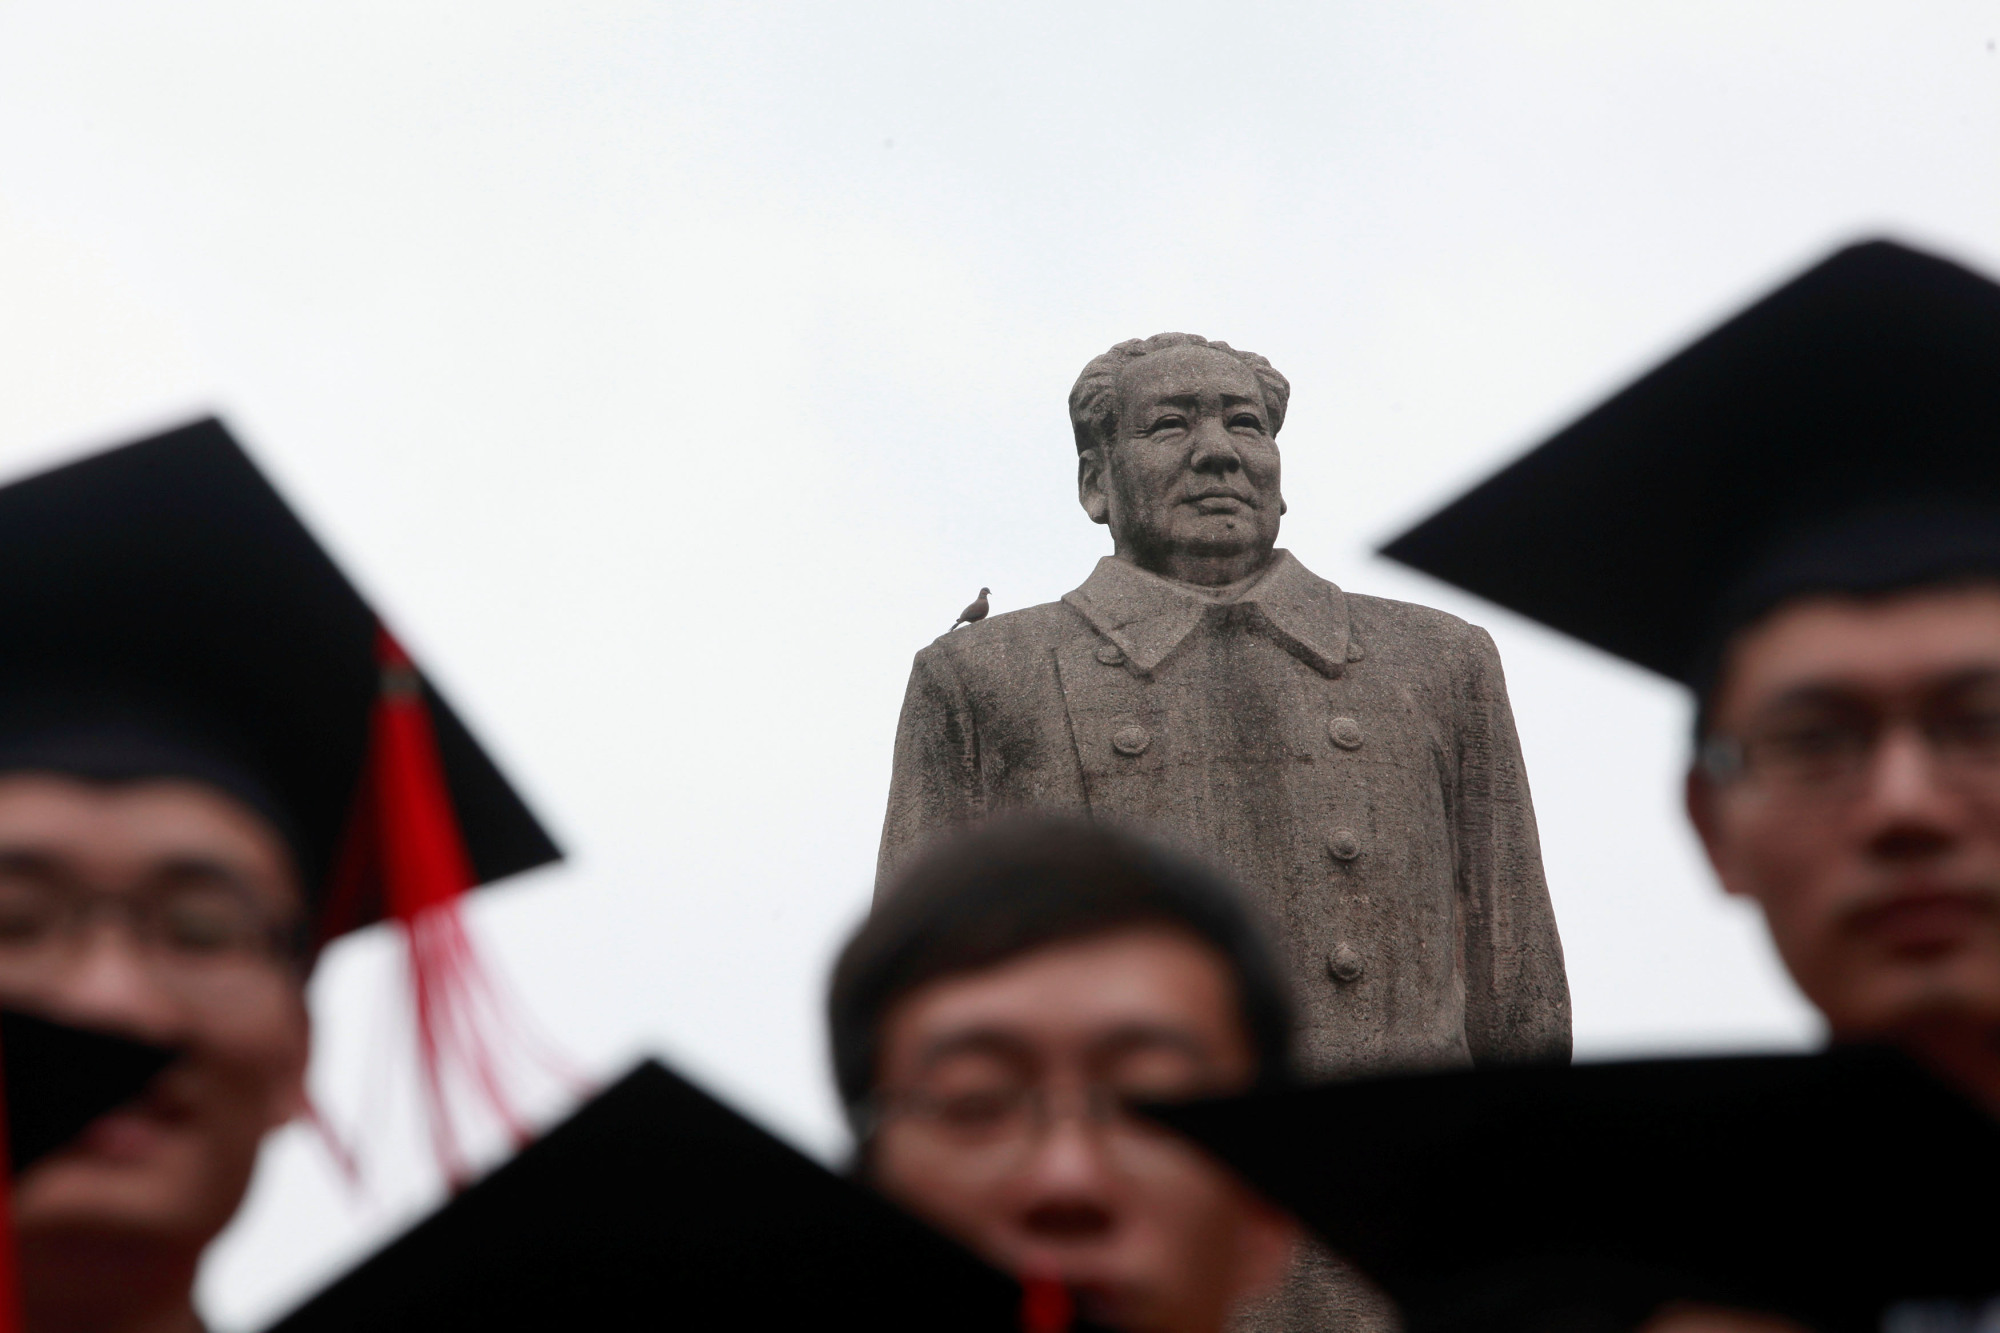 A statue of the late Chinese leader Mao Zedong overlooks a graduation ceremony at Fudan University in Shanghai. | REUTERS